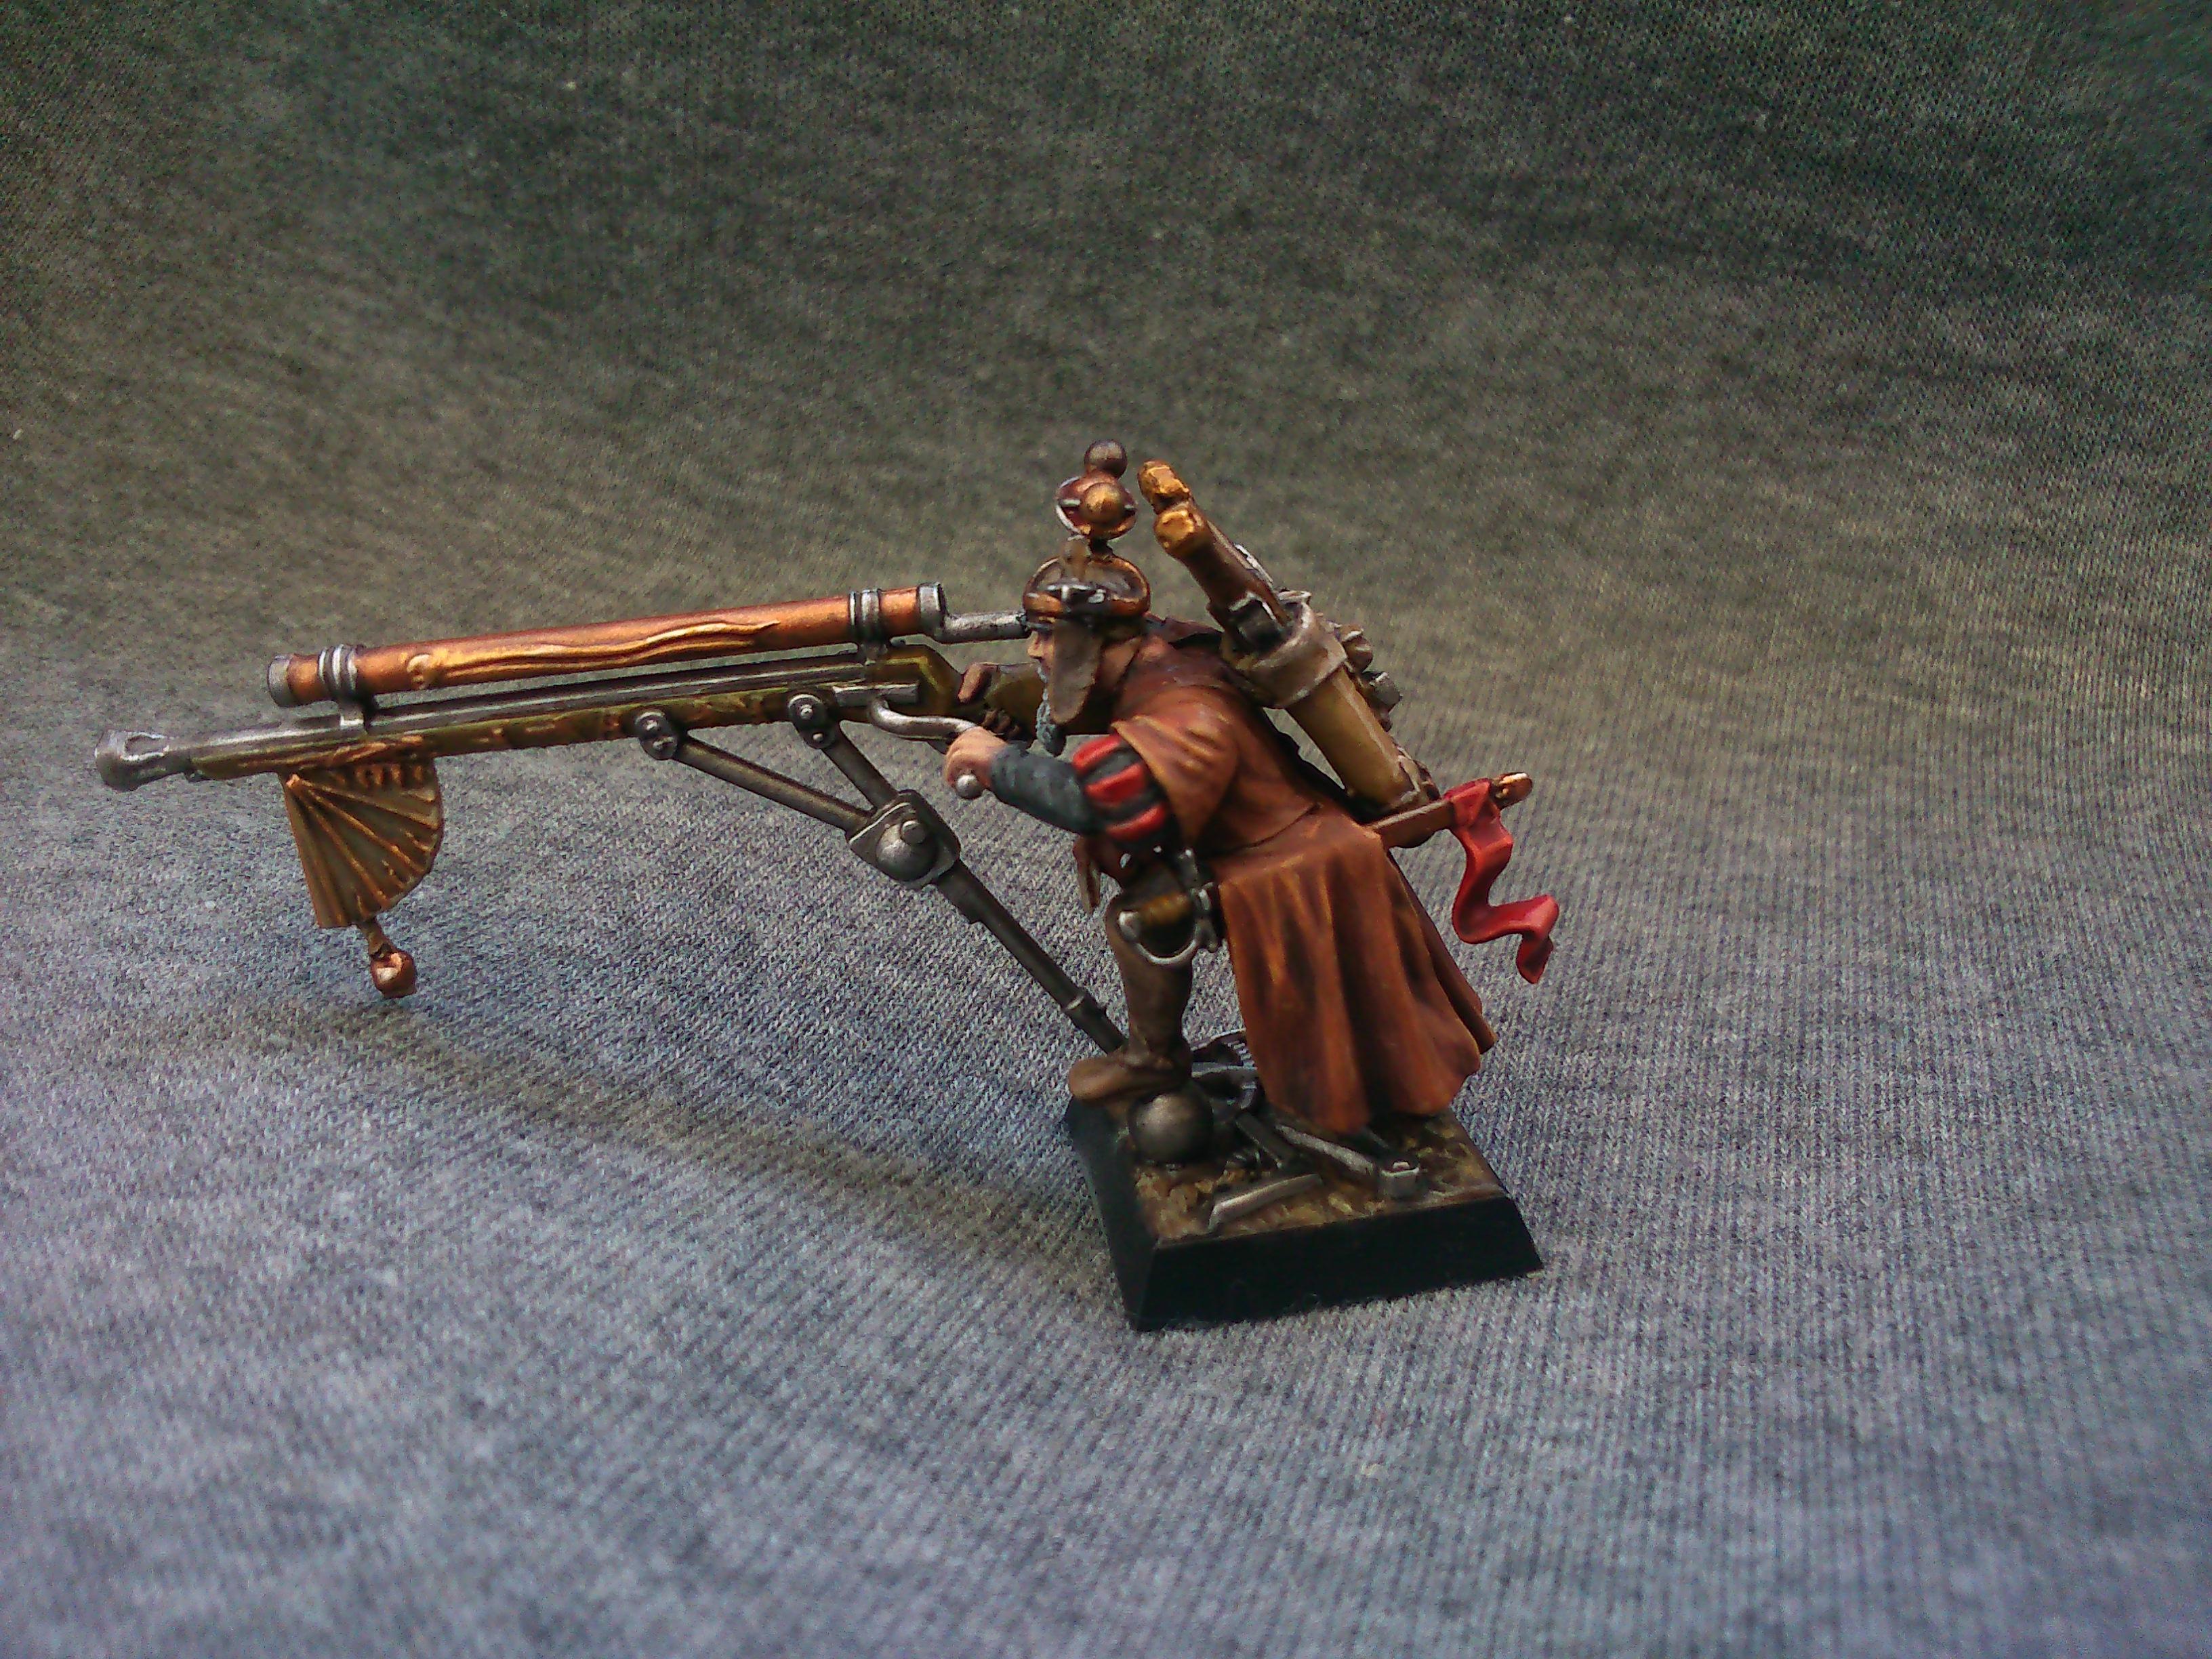 Averland, Captain, Demigryph, Empire, Engineer, Great Cannon, Great Weapon, Greatswords, Hellblaster, Nuln, Warrior Priest